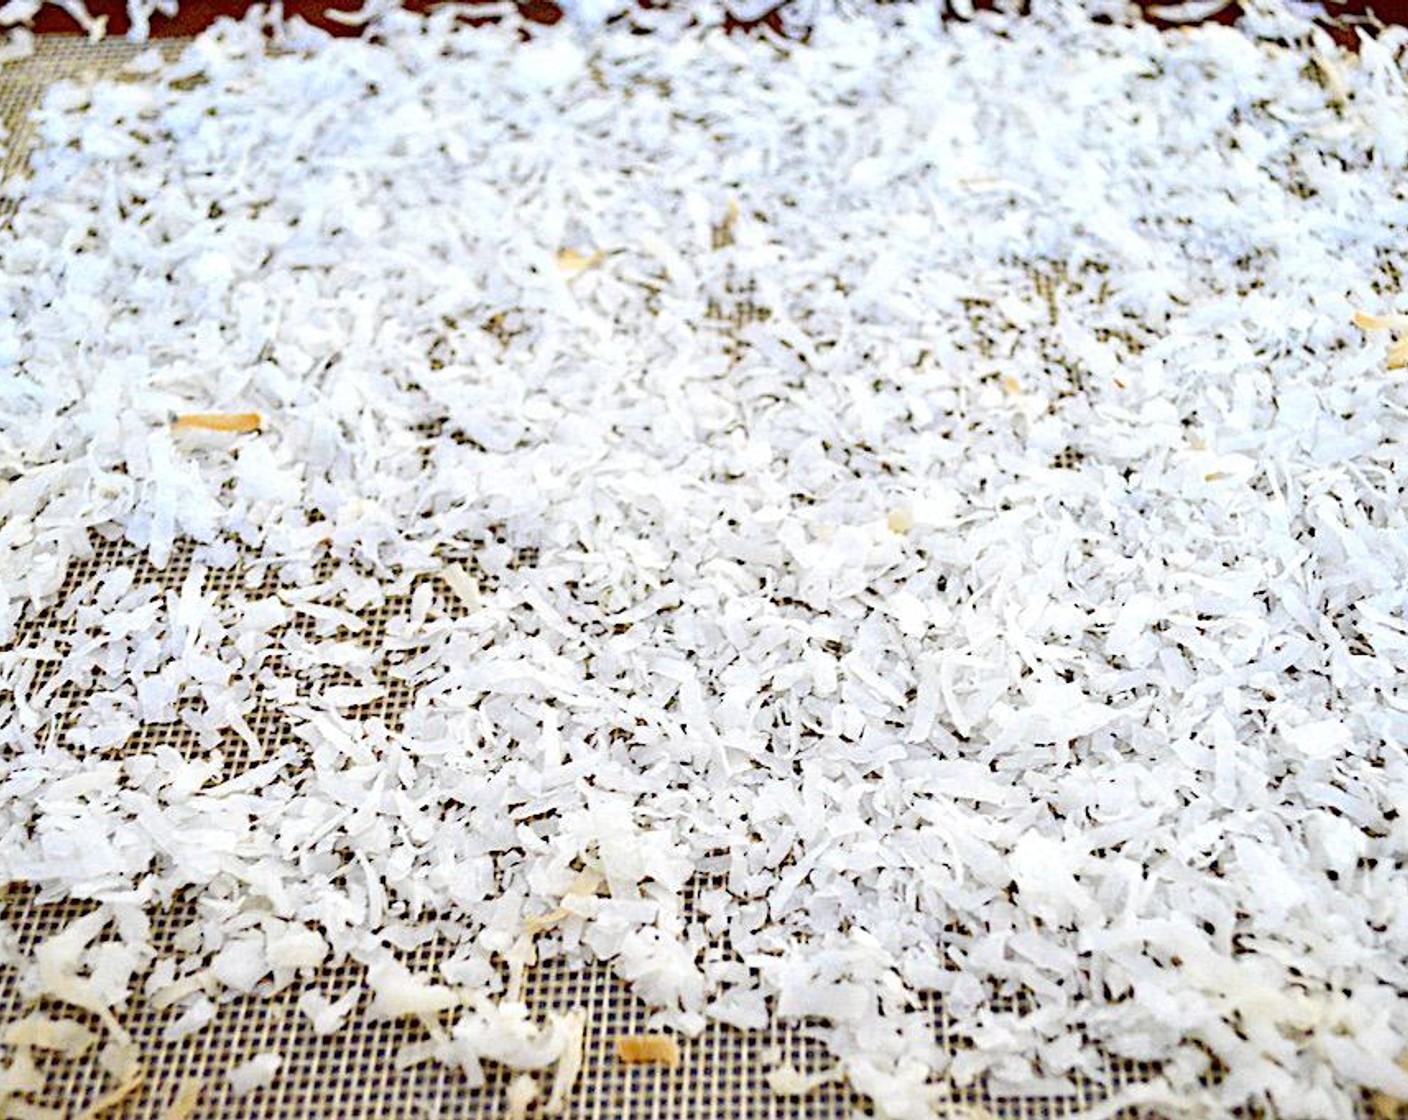 step 4 While it bakes, spread the Unsweetened Shredded Coconut (1 cup) out onto a lined sheet tray and toast it in the oven with the crust on another shelf. It should take 5-7 minutes for it to toast perfectly. Let the crust and coconut cool completely once they are done.